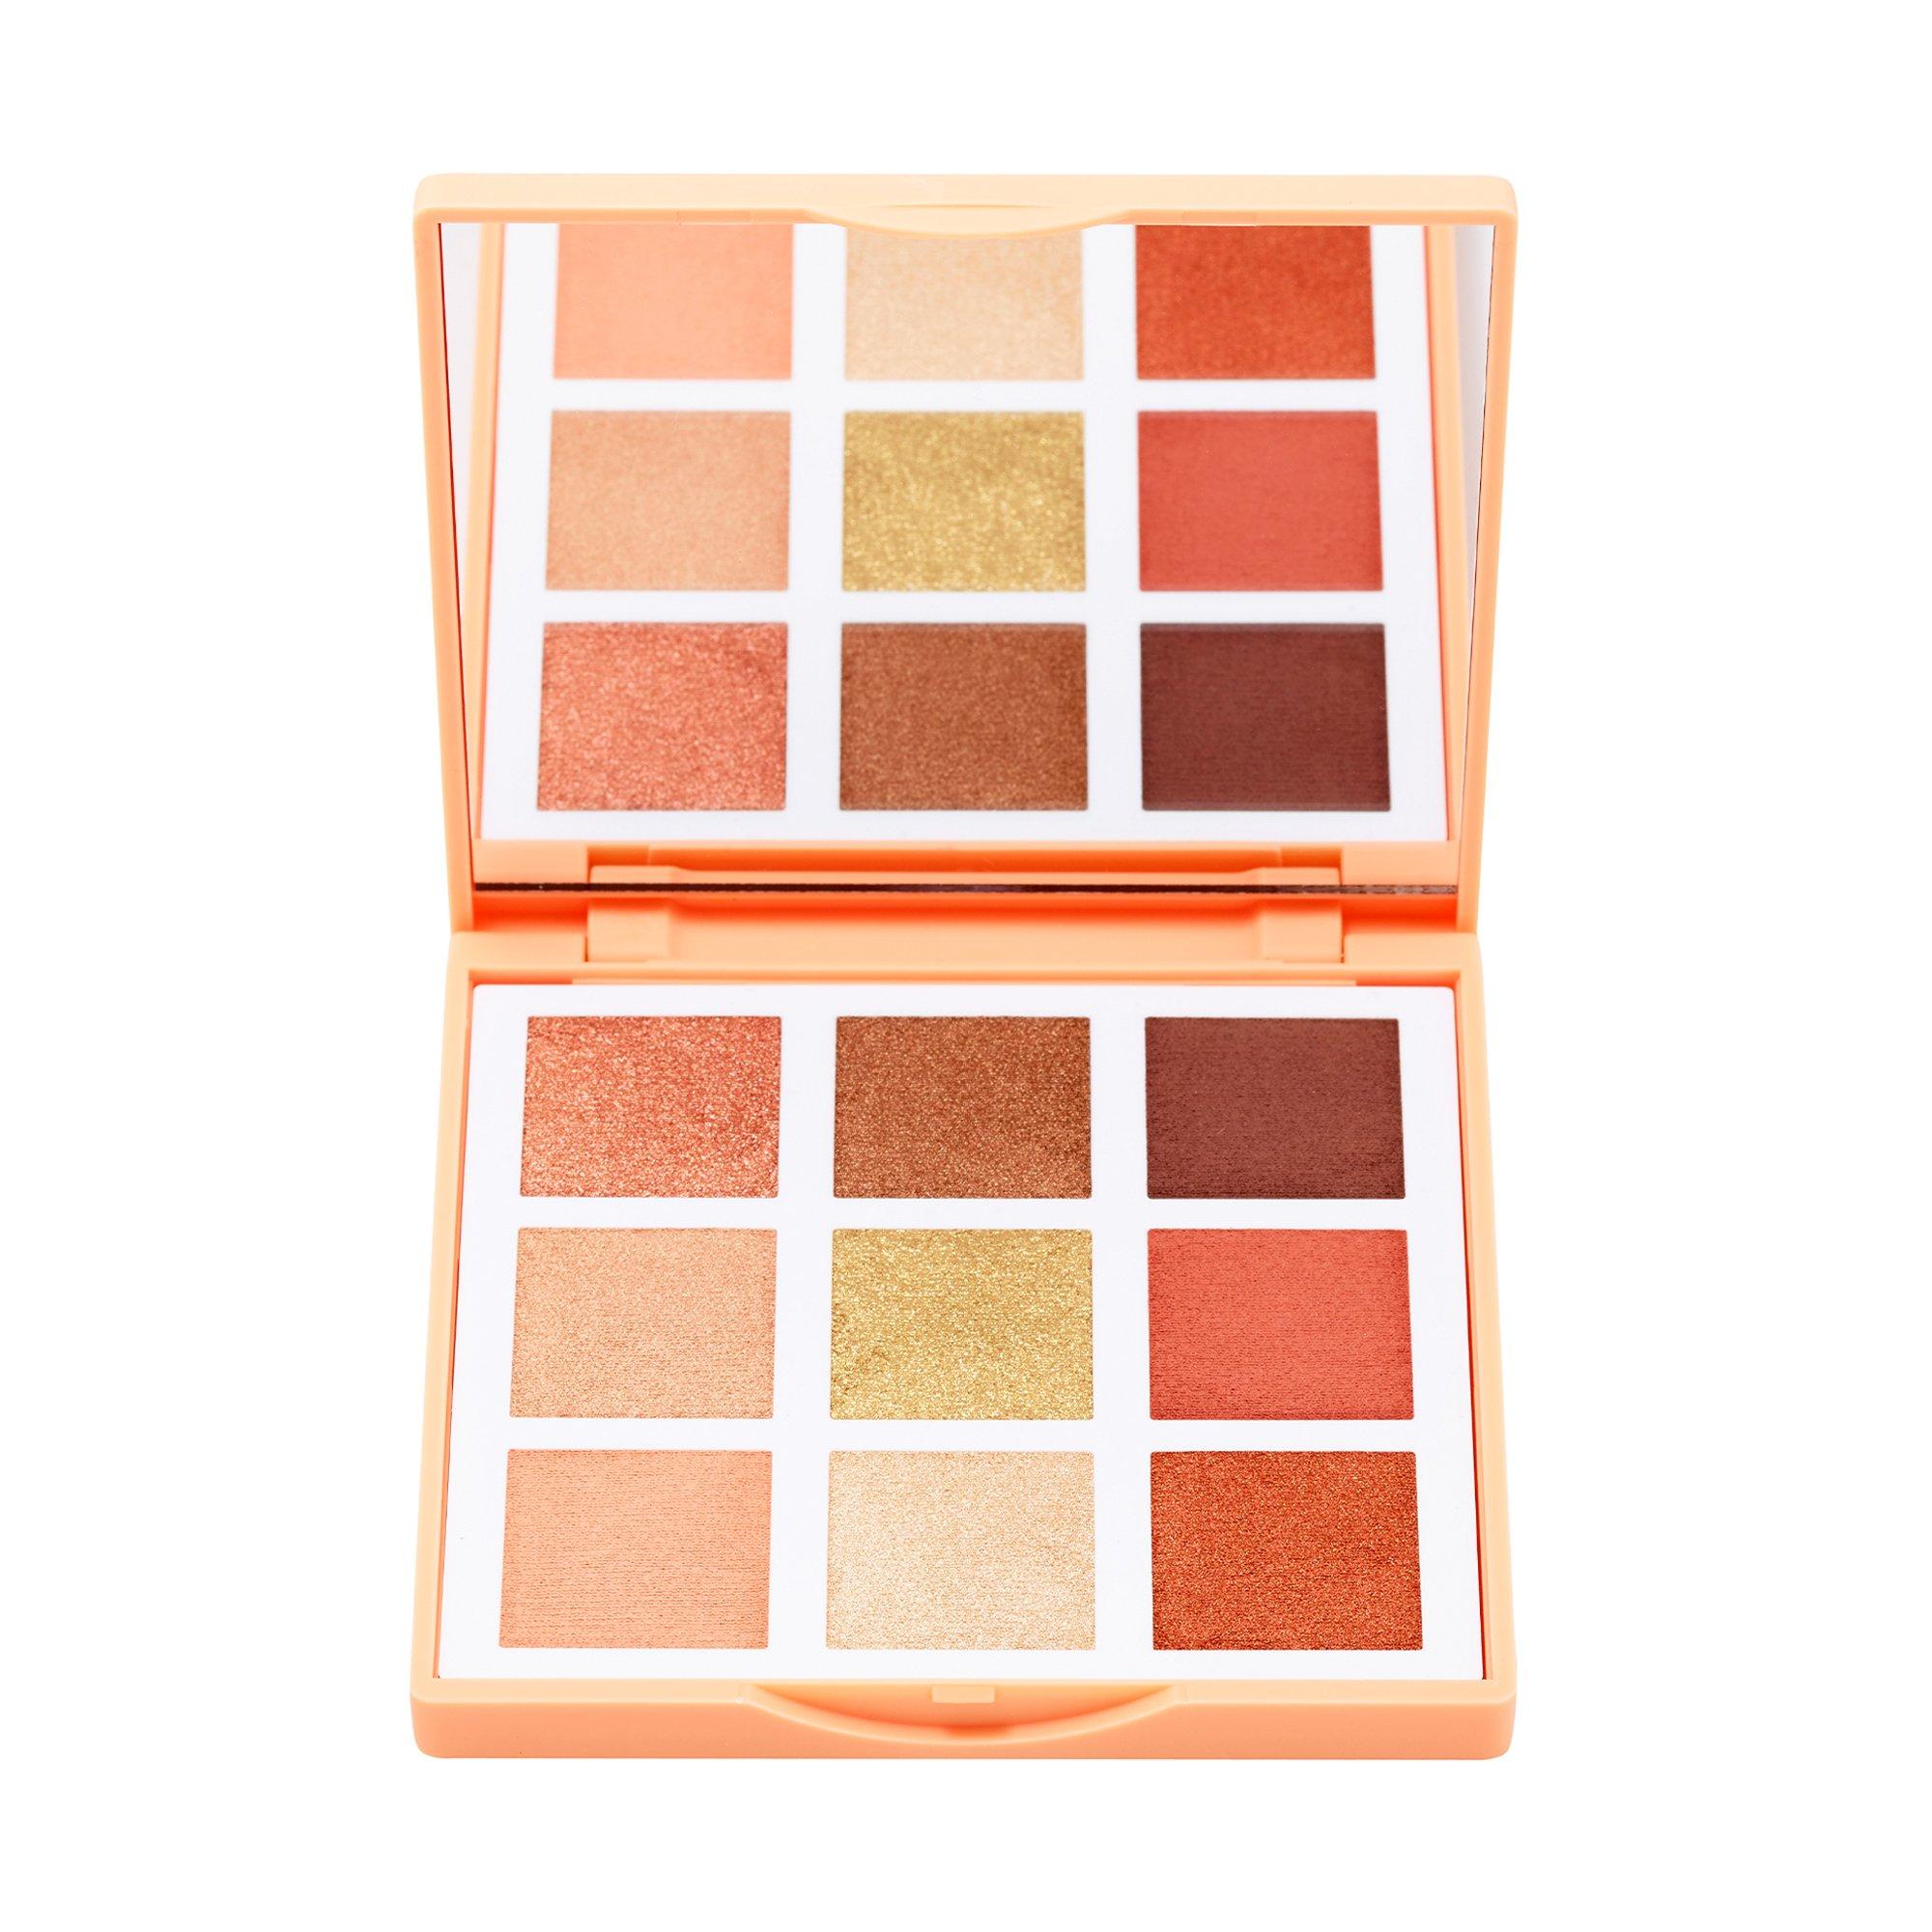 Image of 3INA The Sunset Eyeshadow Palette - 9g